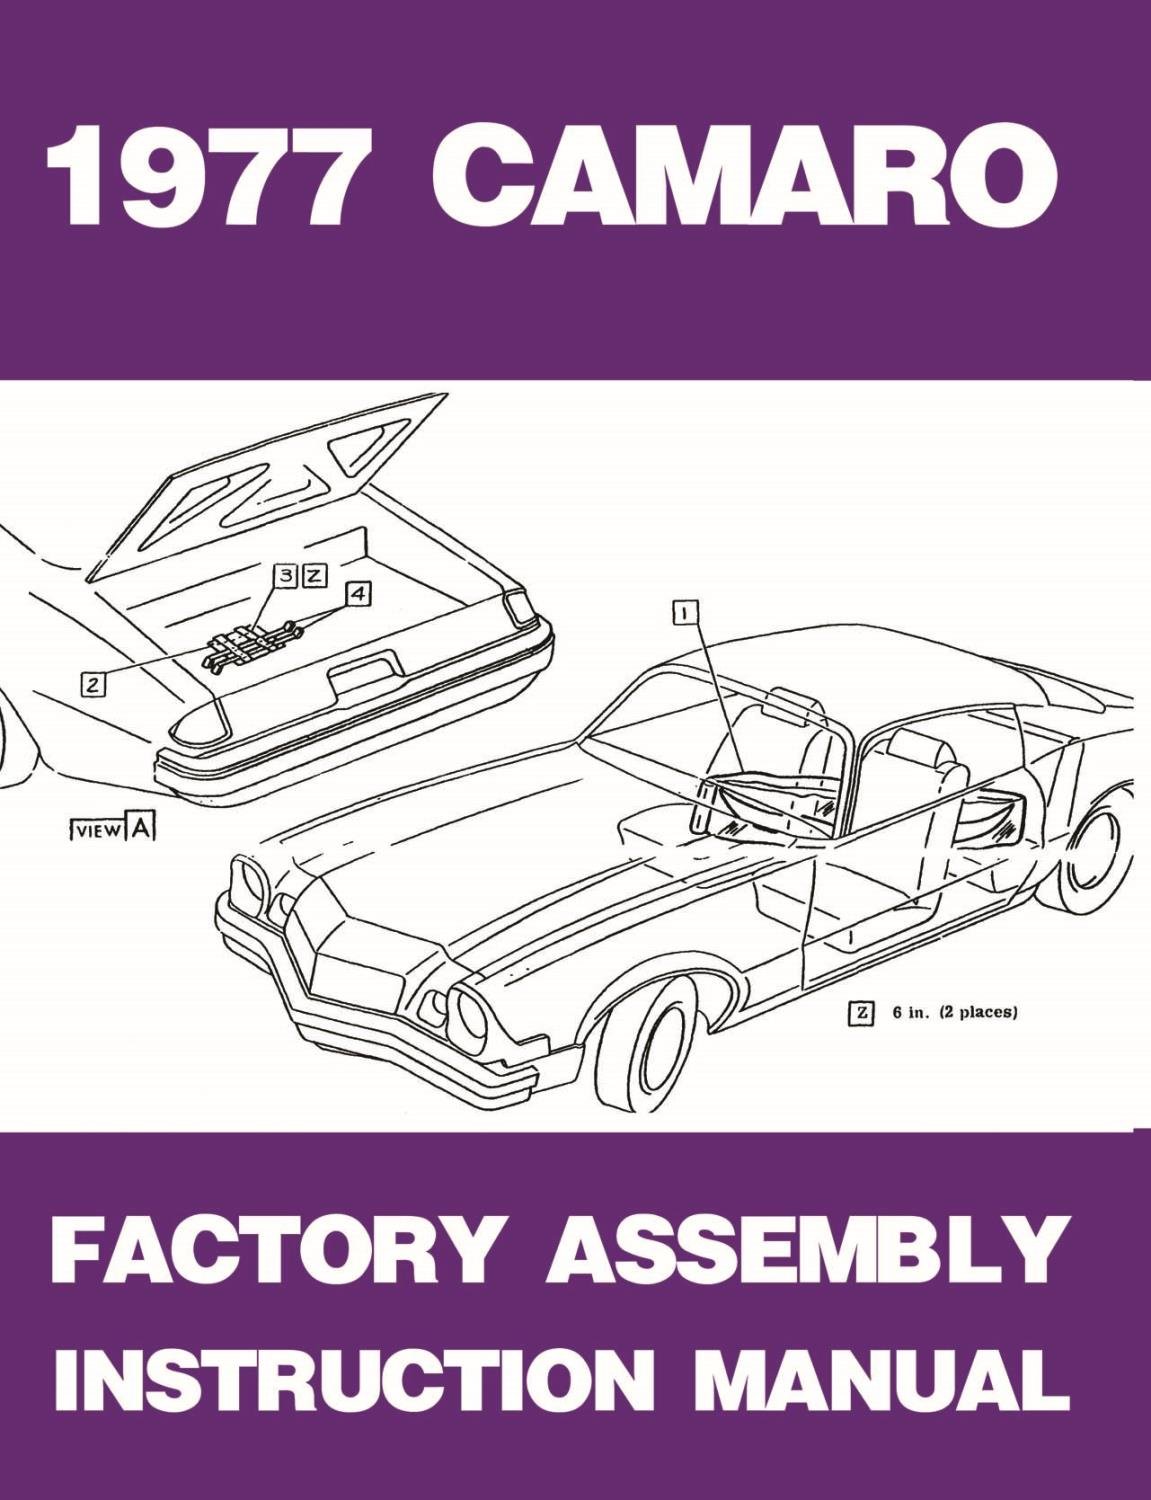 Factory Assembly Instruction Manual for 1977 Chevrolet Camaro